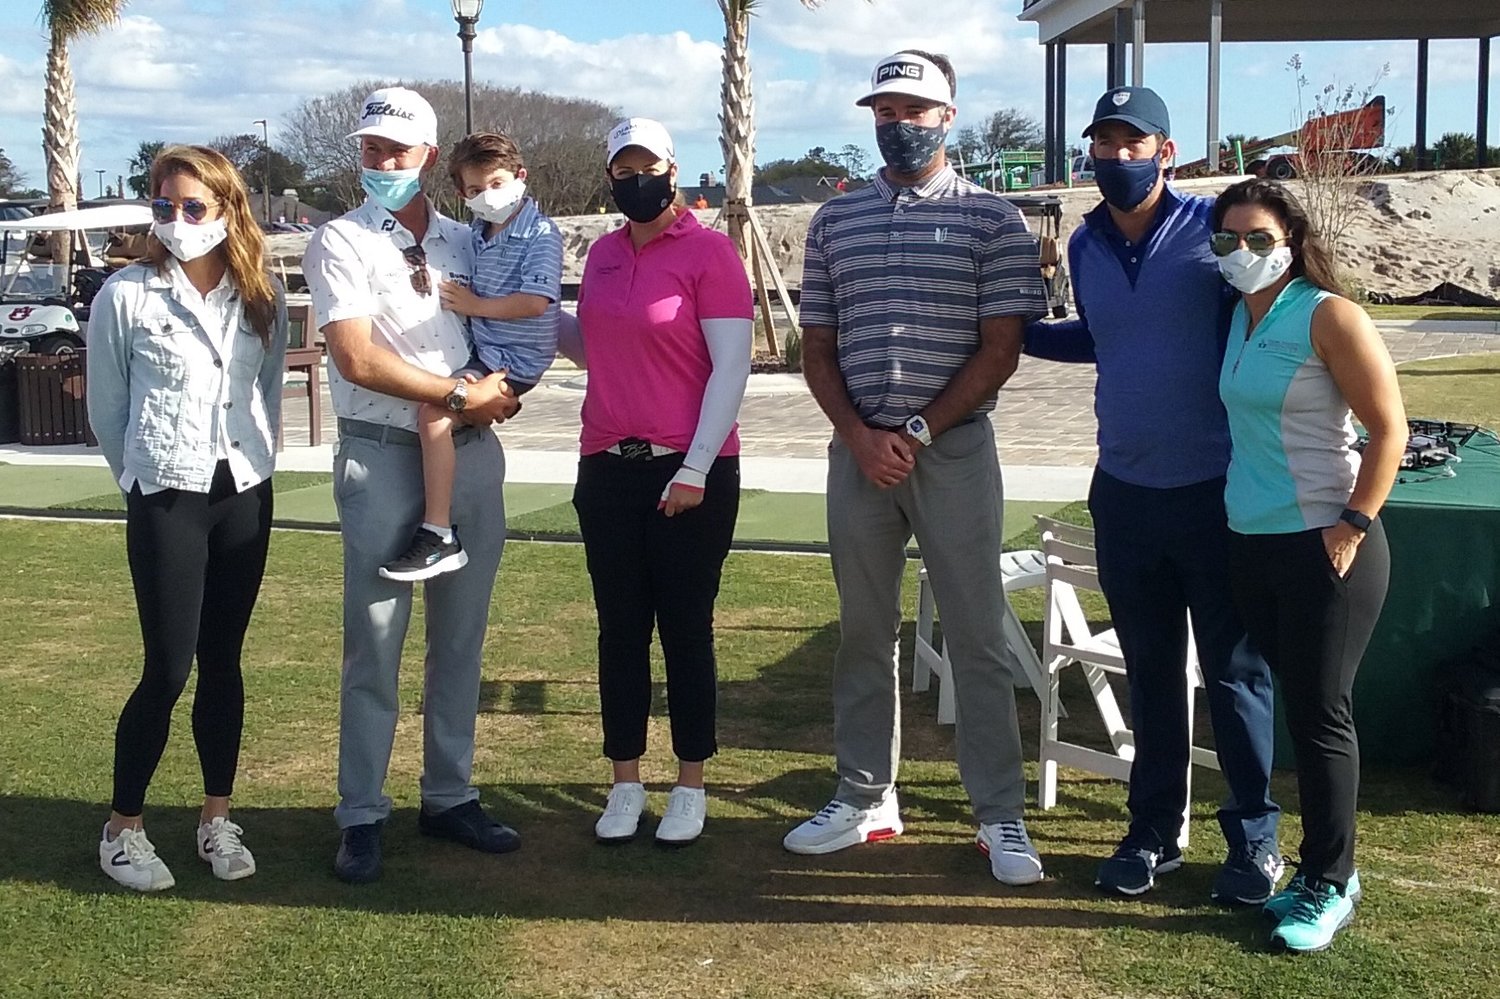 At the Tesori Family Foundation All-Star Kids Clinic on March 10 are, from left: foundation Executive Director Genna Lancaster, Webb Simpson holding Isaiah Tesori, Brittany Lincicome, Bubba Watson, Paul Tesori and Michelle Tesori.